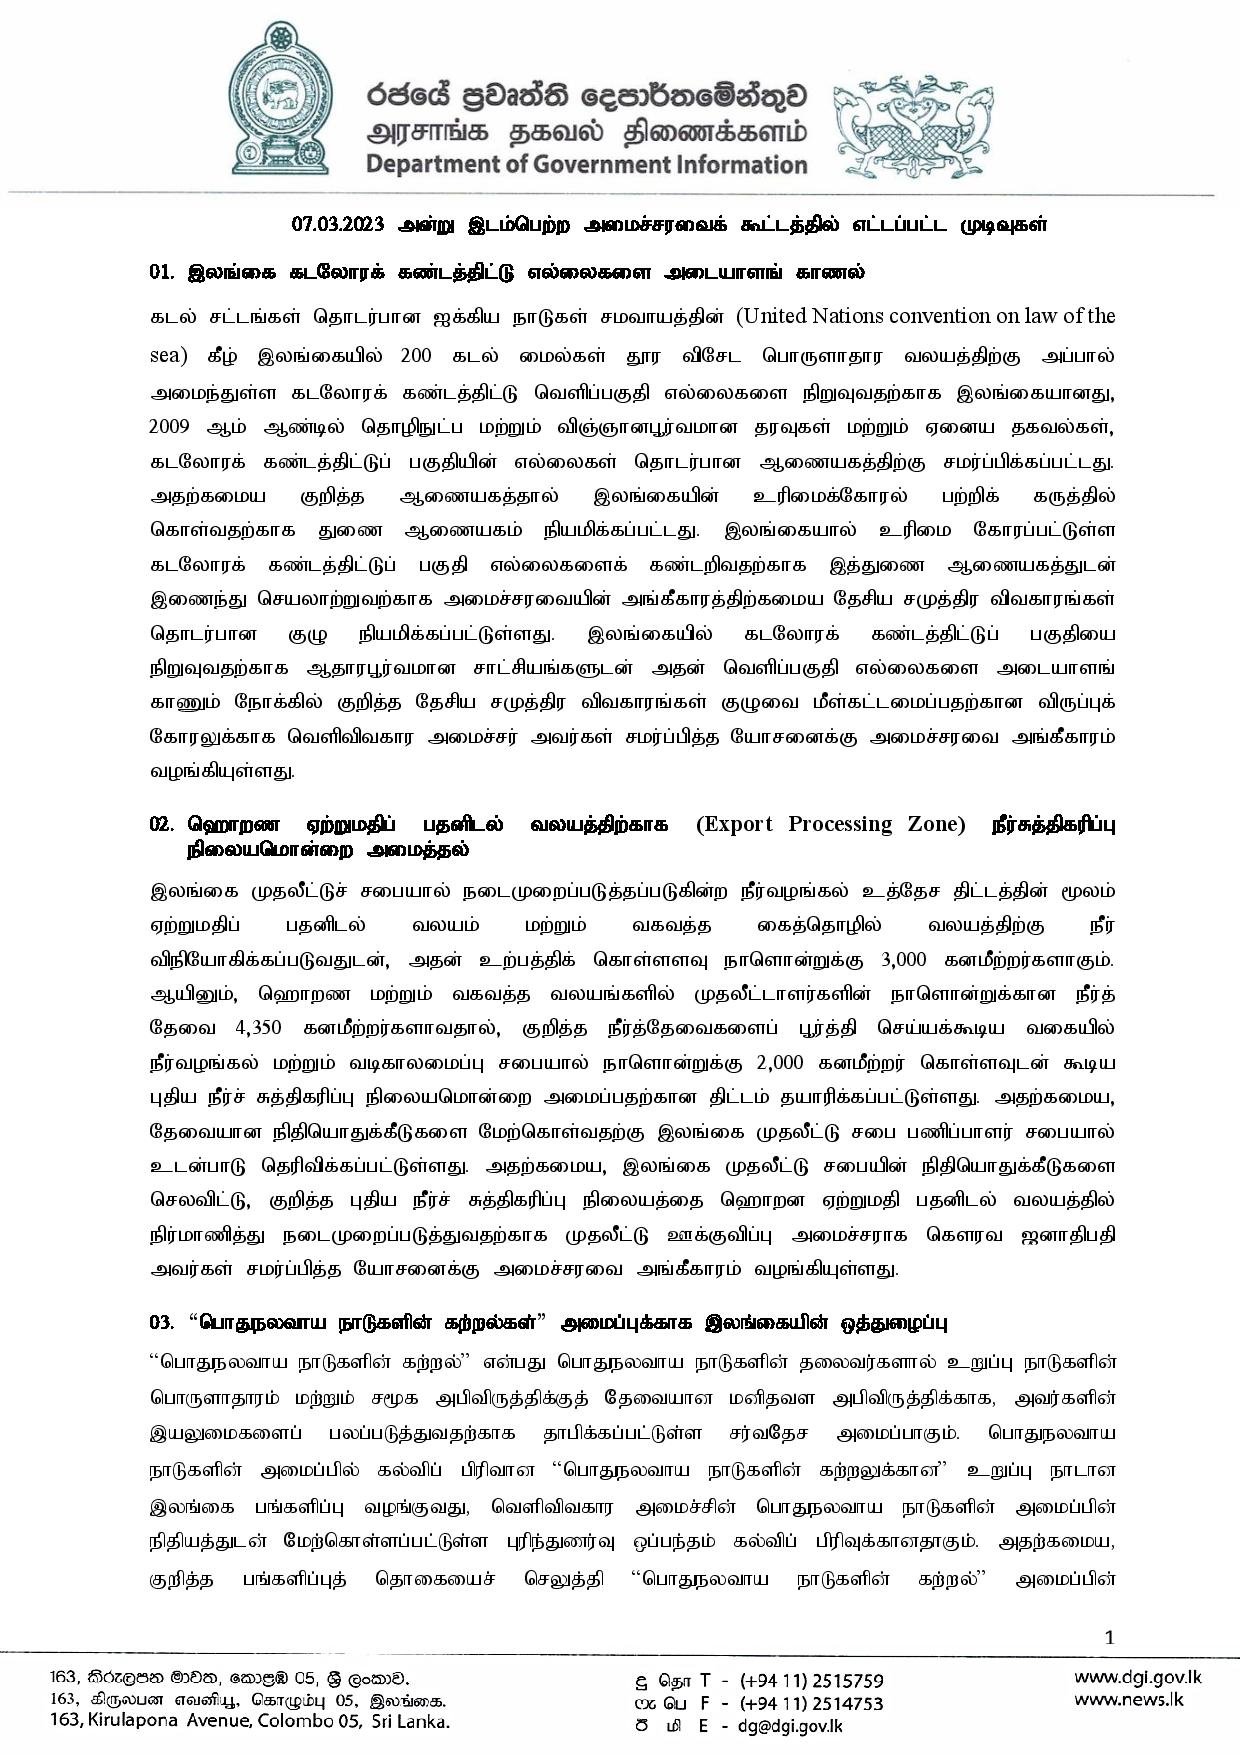 Cabinet Decisions on 07.03.2023 Tamil page 001